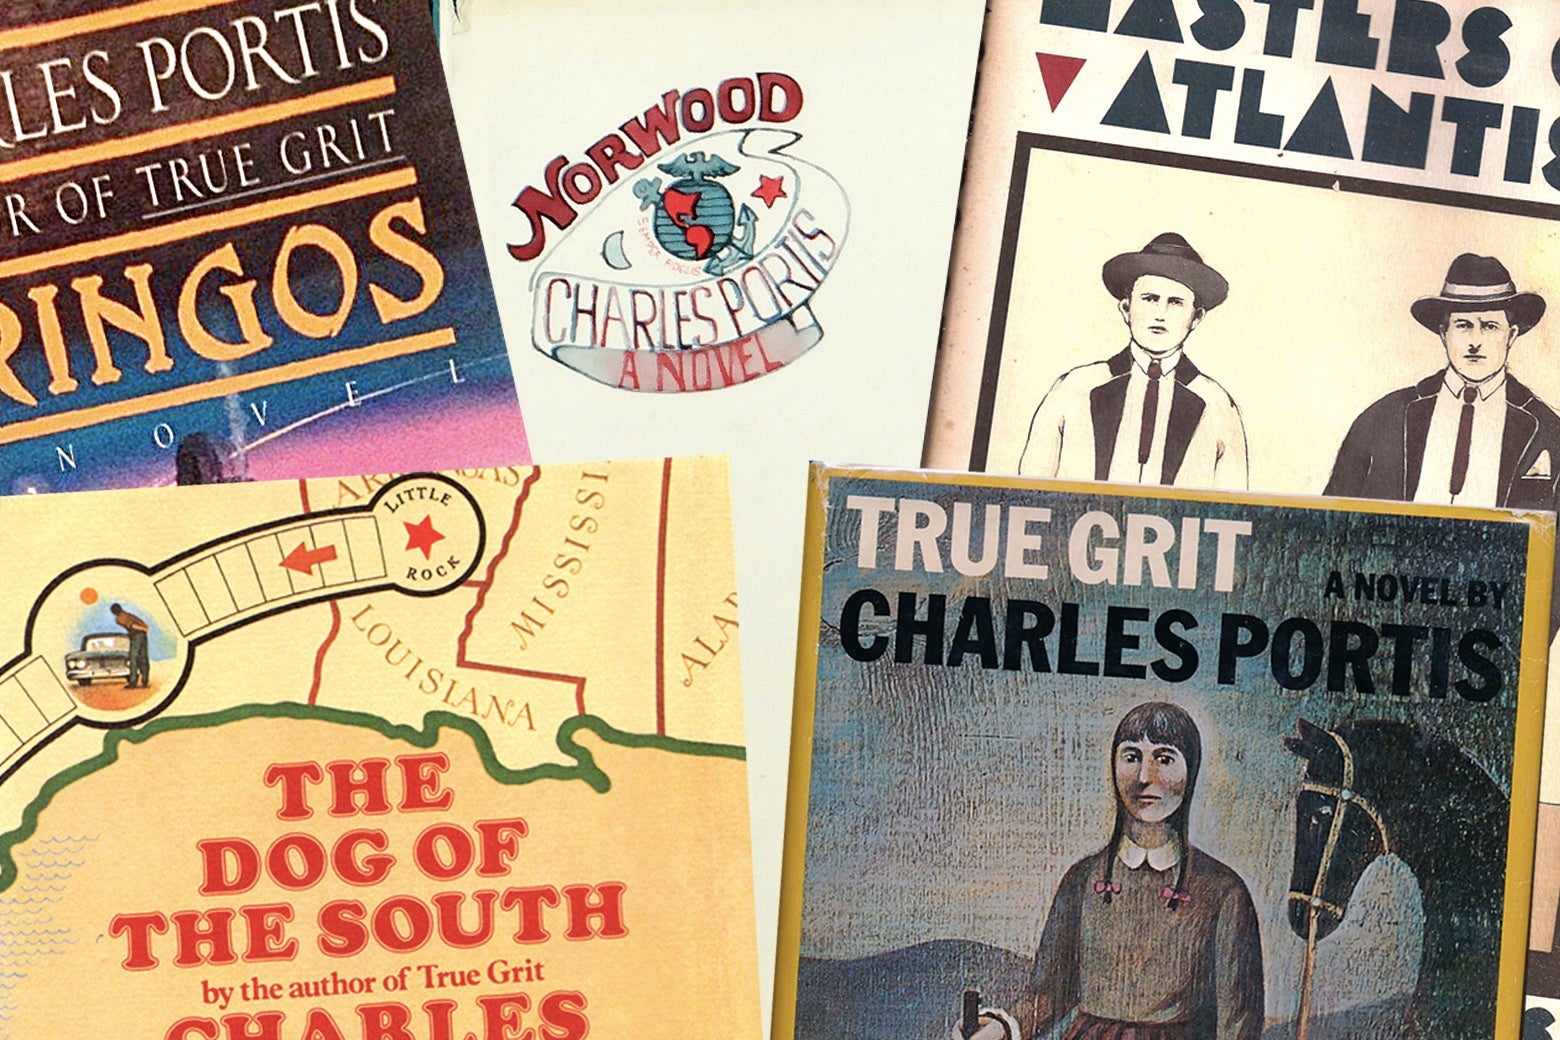 A collage of the first edition covers of Charle Portis novels: Gringos, The Dog of the South, Masters of Atlantis, True Grit, and Norwood.